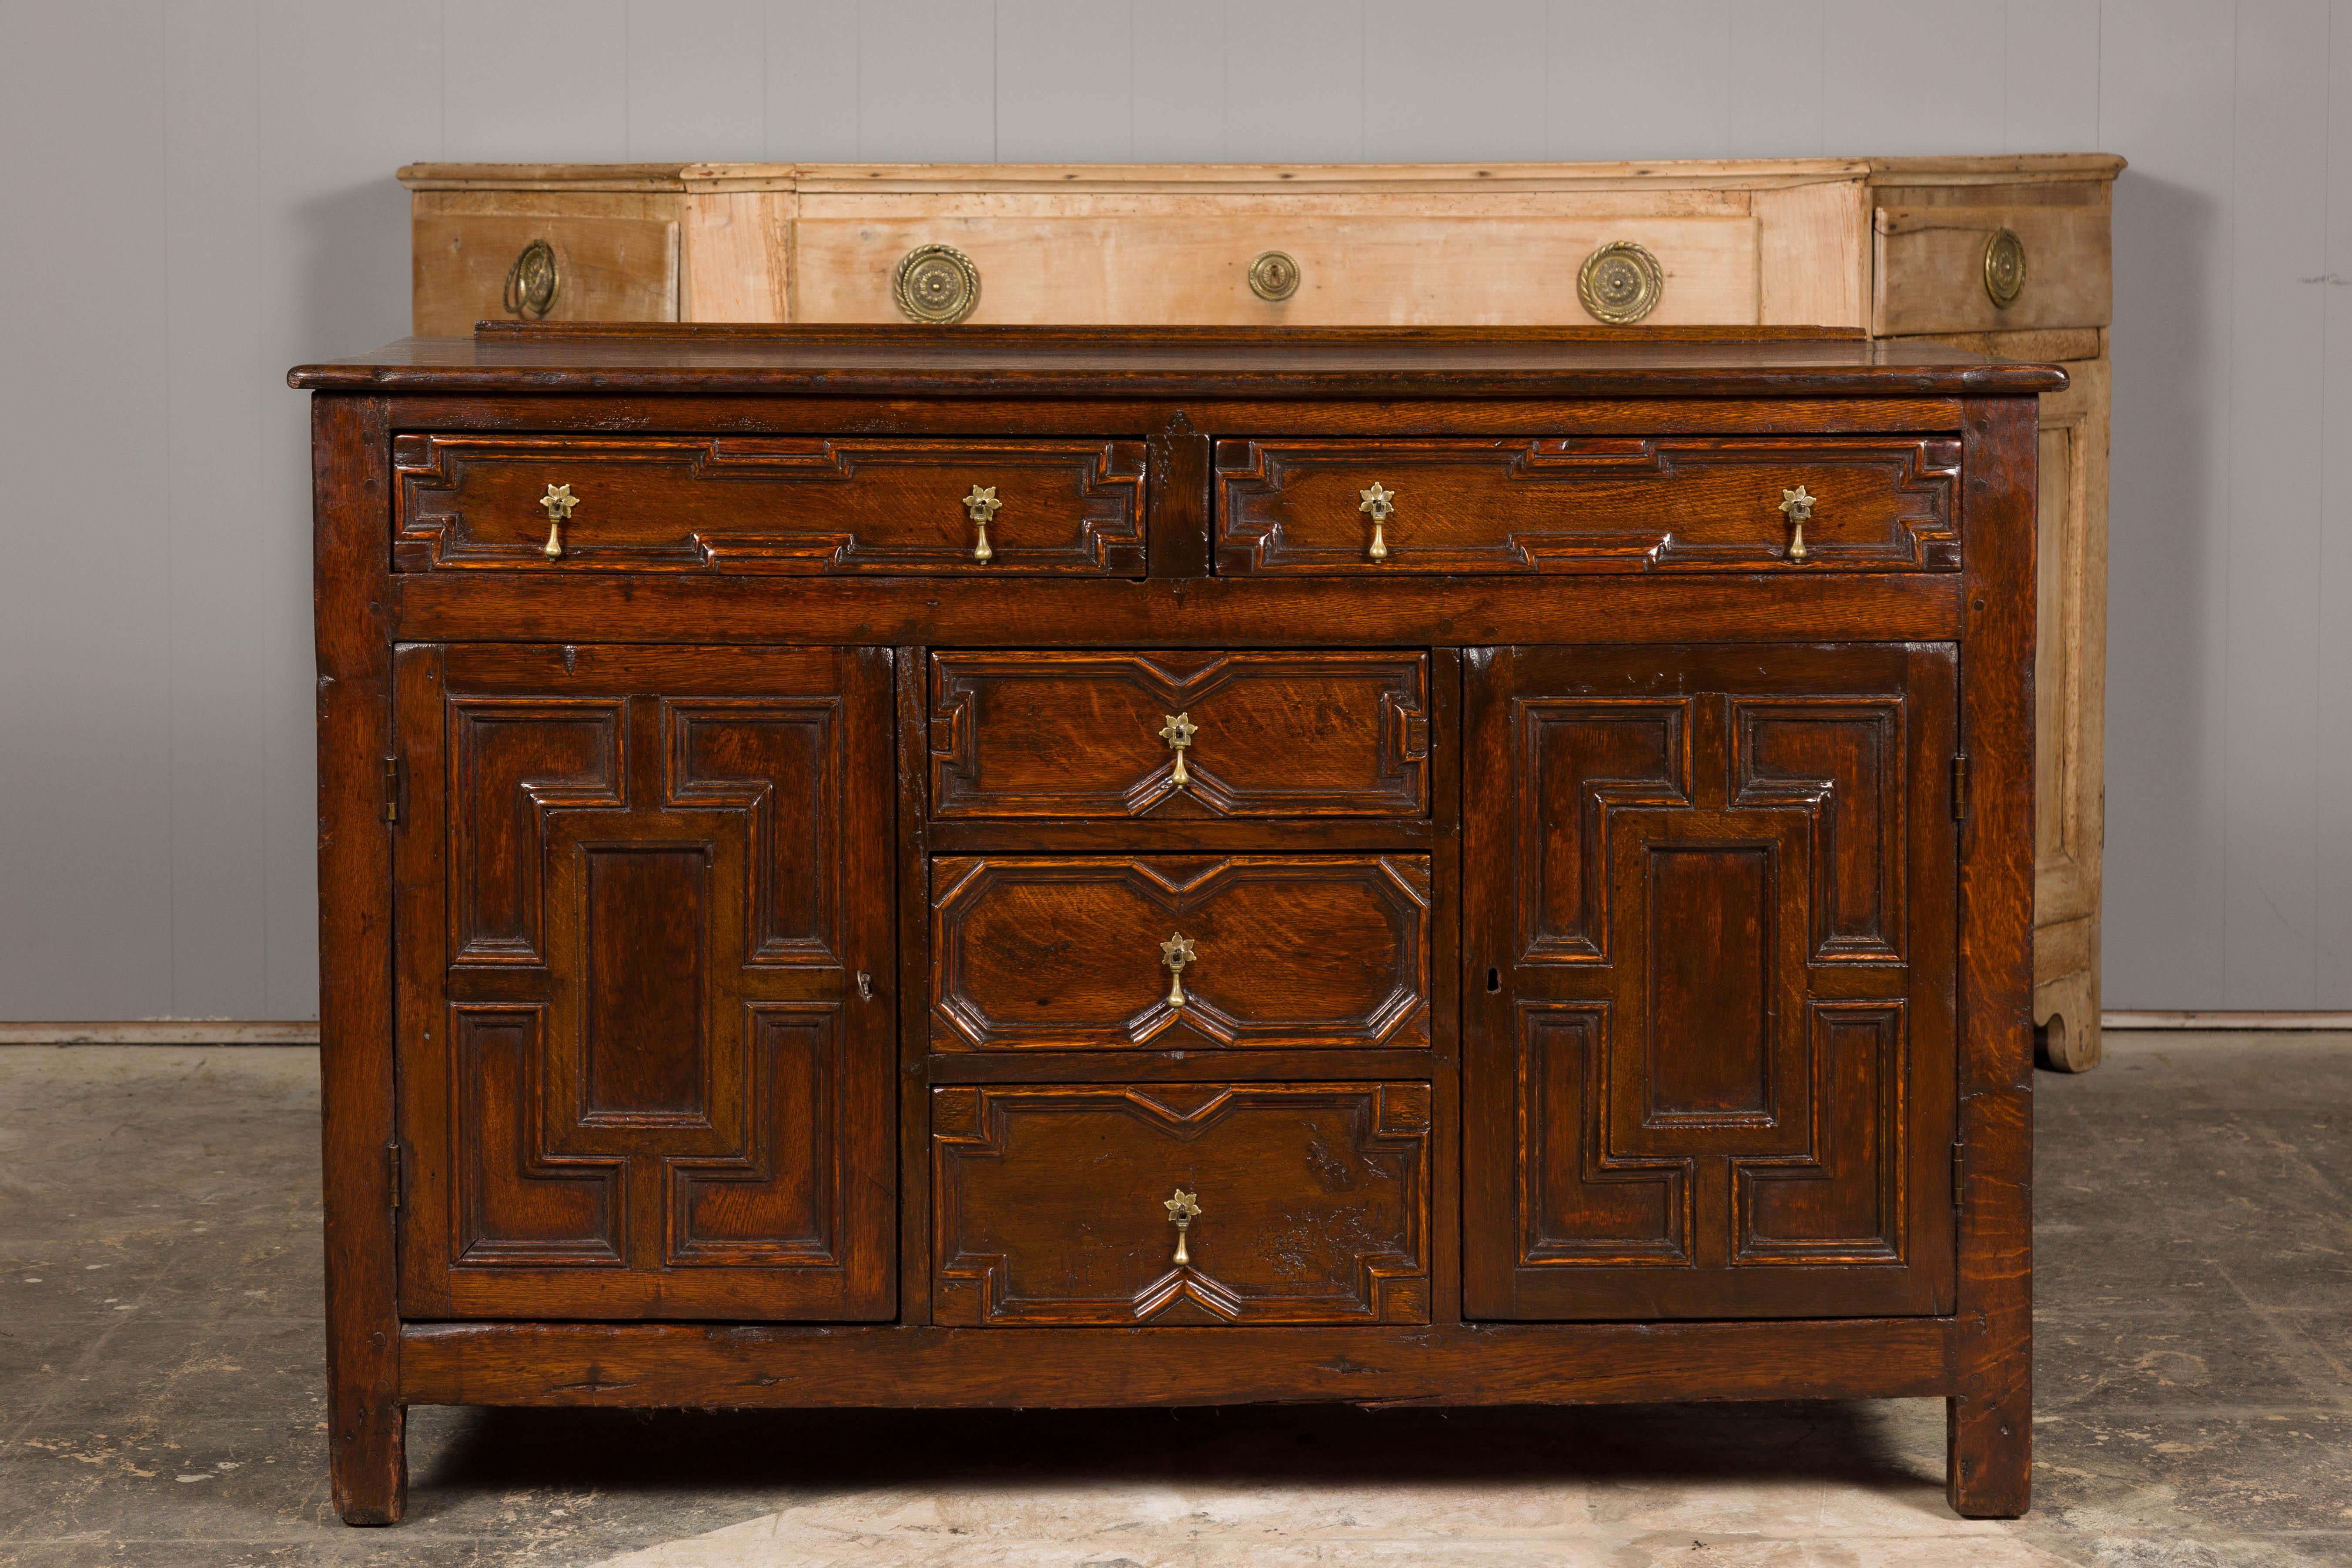 An English oak dresser base from the 19th century with geometric front, five drawers, two doors and brass hardware. Immerse in the rustic charm and time-honored craftsmanship of this 19th century English oak dresser base, a delightful convergence of